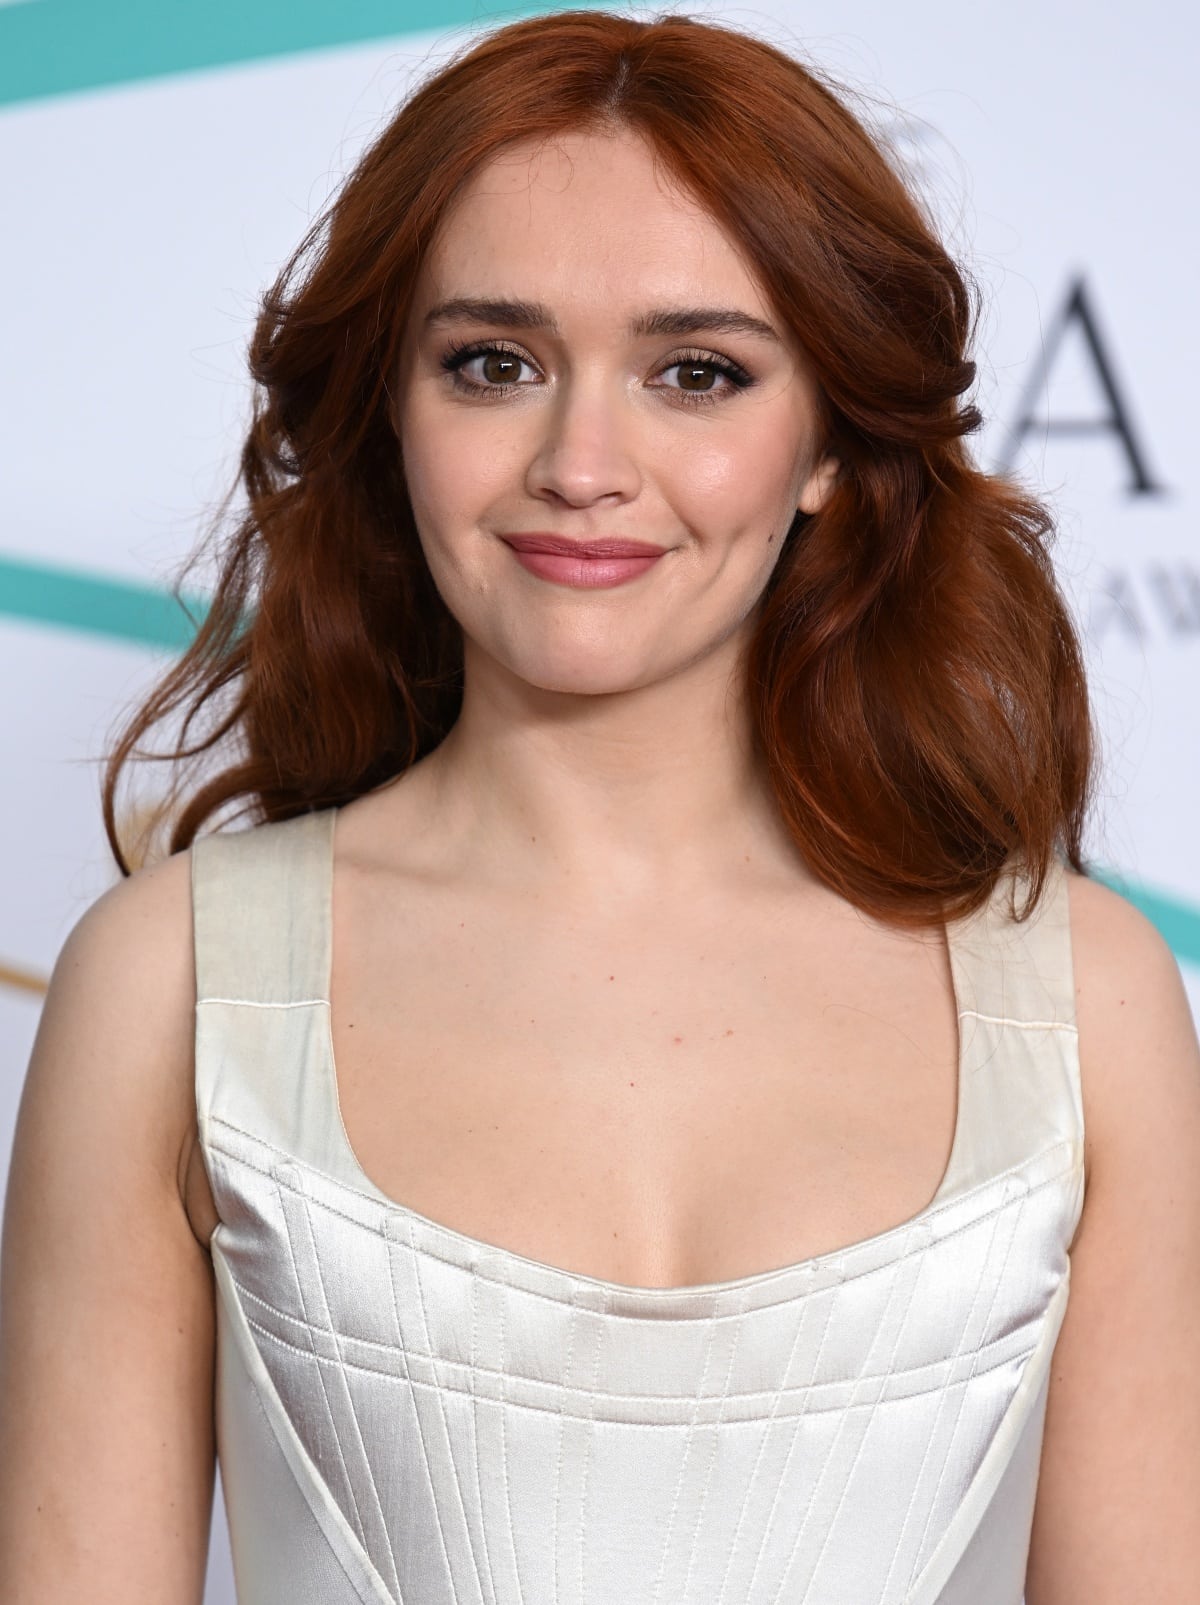 Olivia Cooke was born on December 27, 1993 and eventually found her creative outlet at 8 years old in ballet and acting